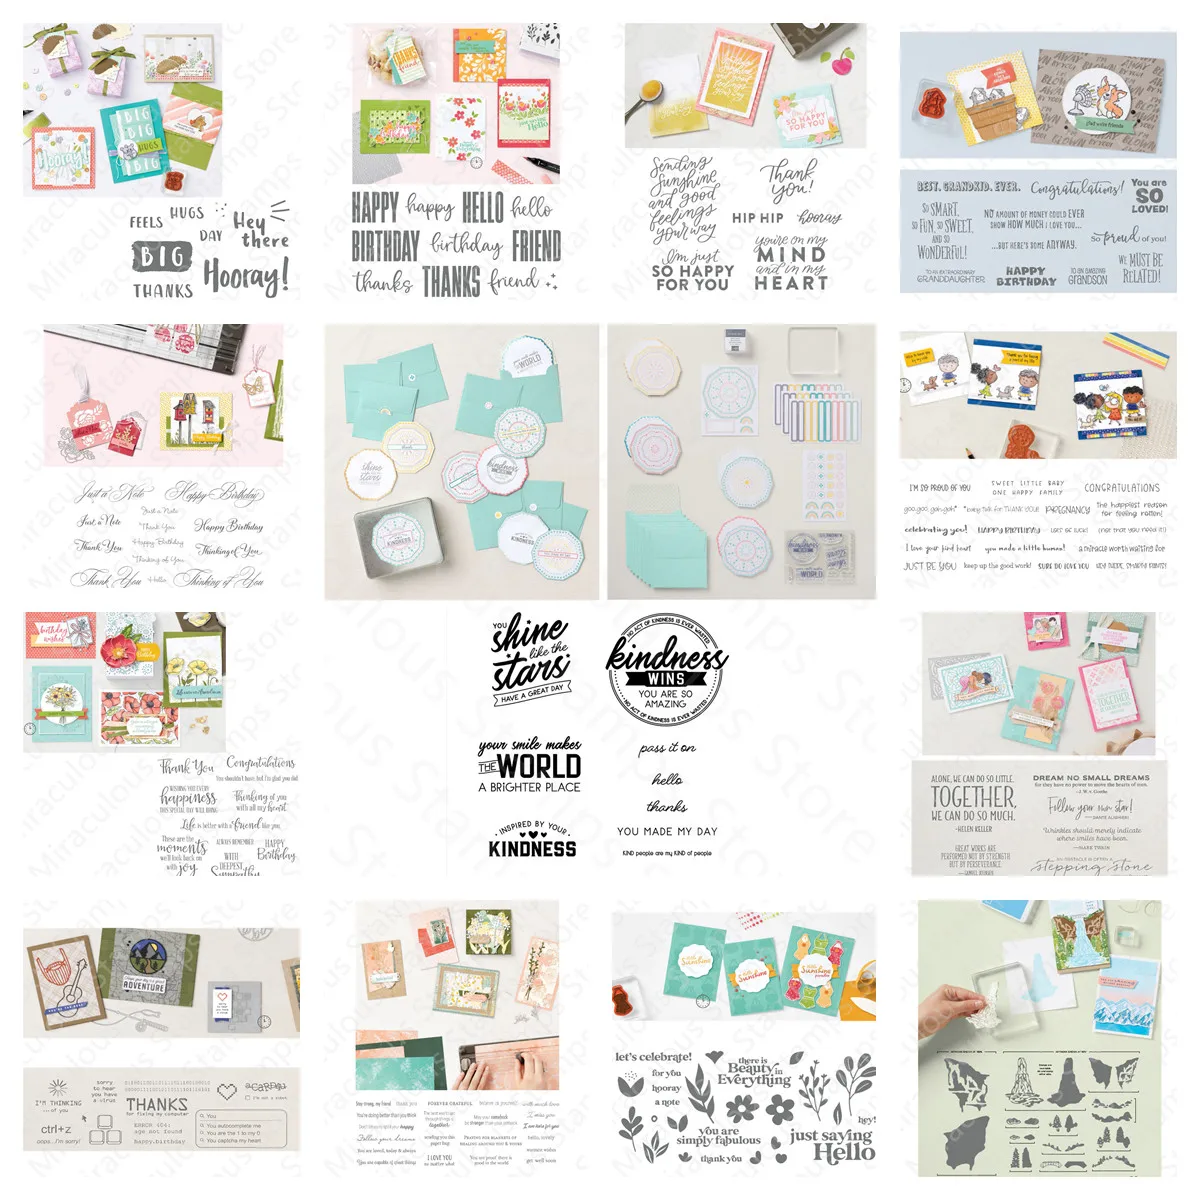 2022 New Arrival KINDNESS CARDS KIT Clear Stamps Seal For DIY Scrapbooking Wedding Photo Album Decorative Craft No Cutting Dies